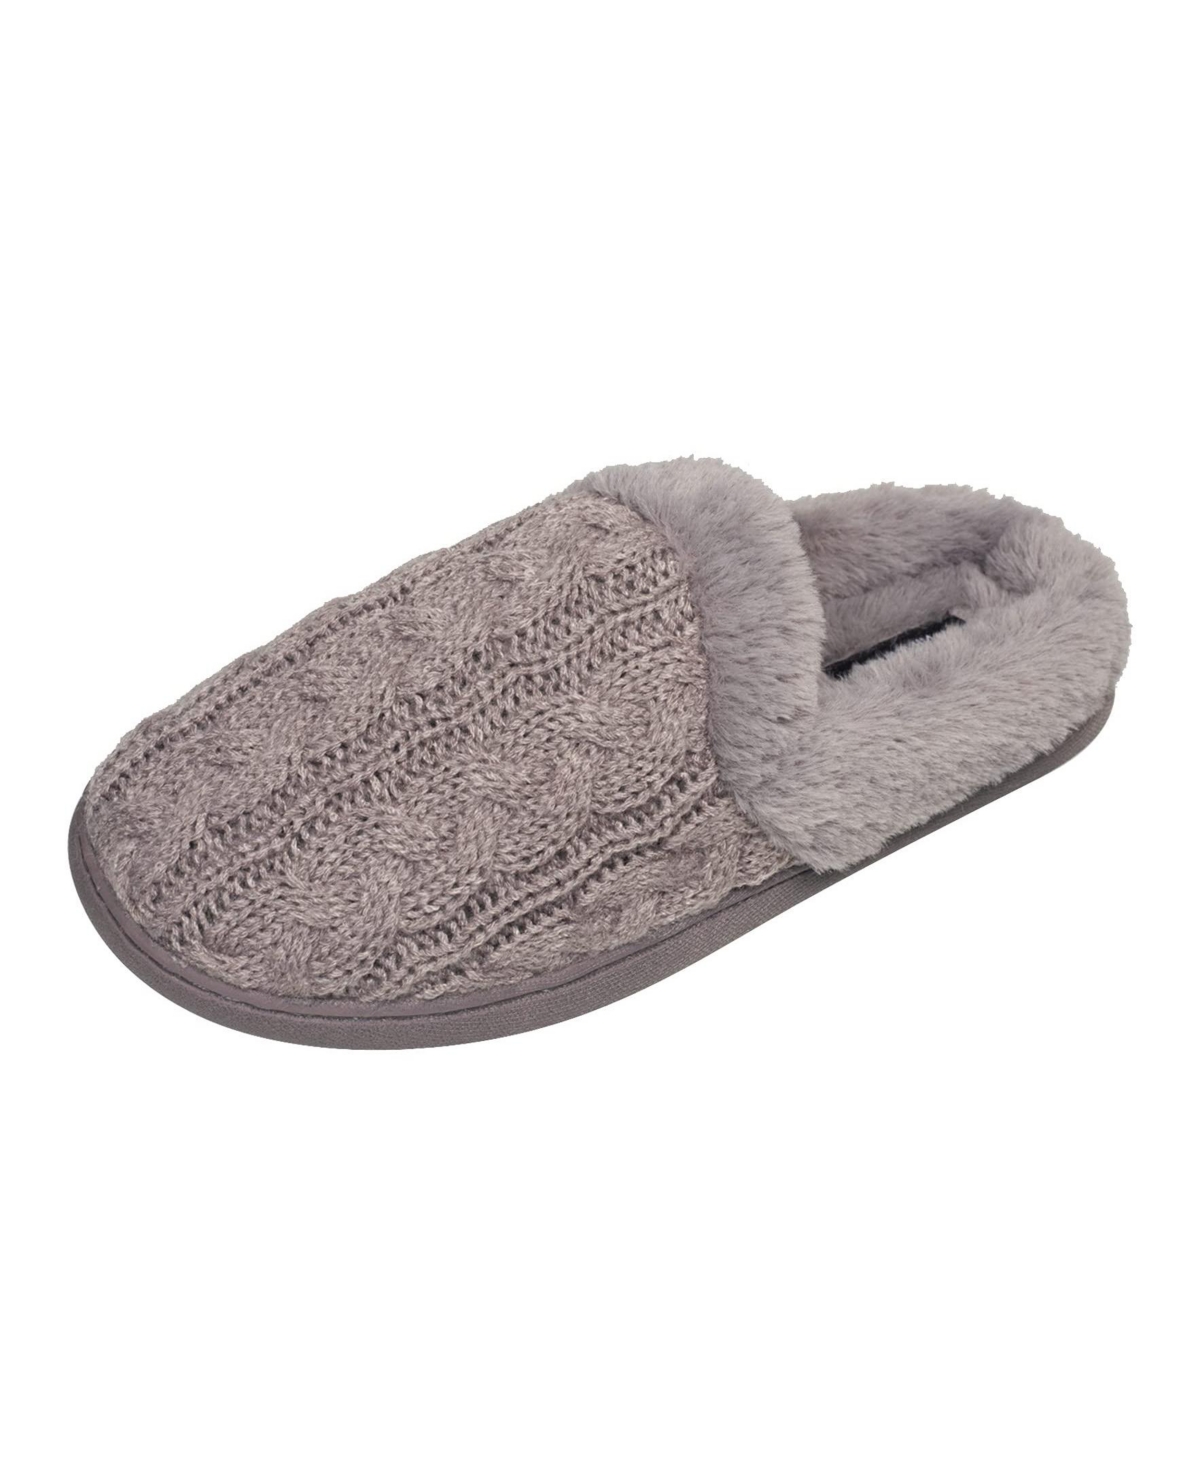 Women's Cable Knit Clog - Grey